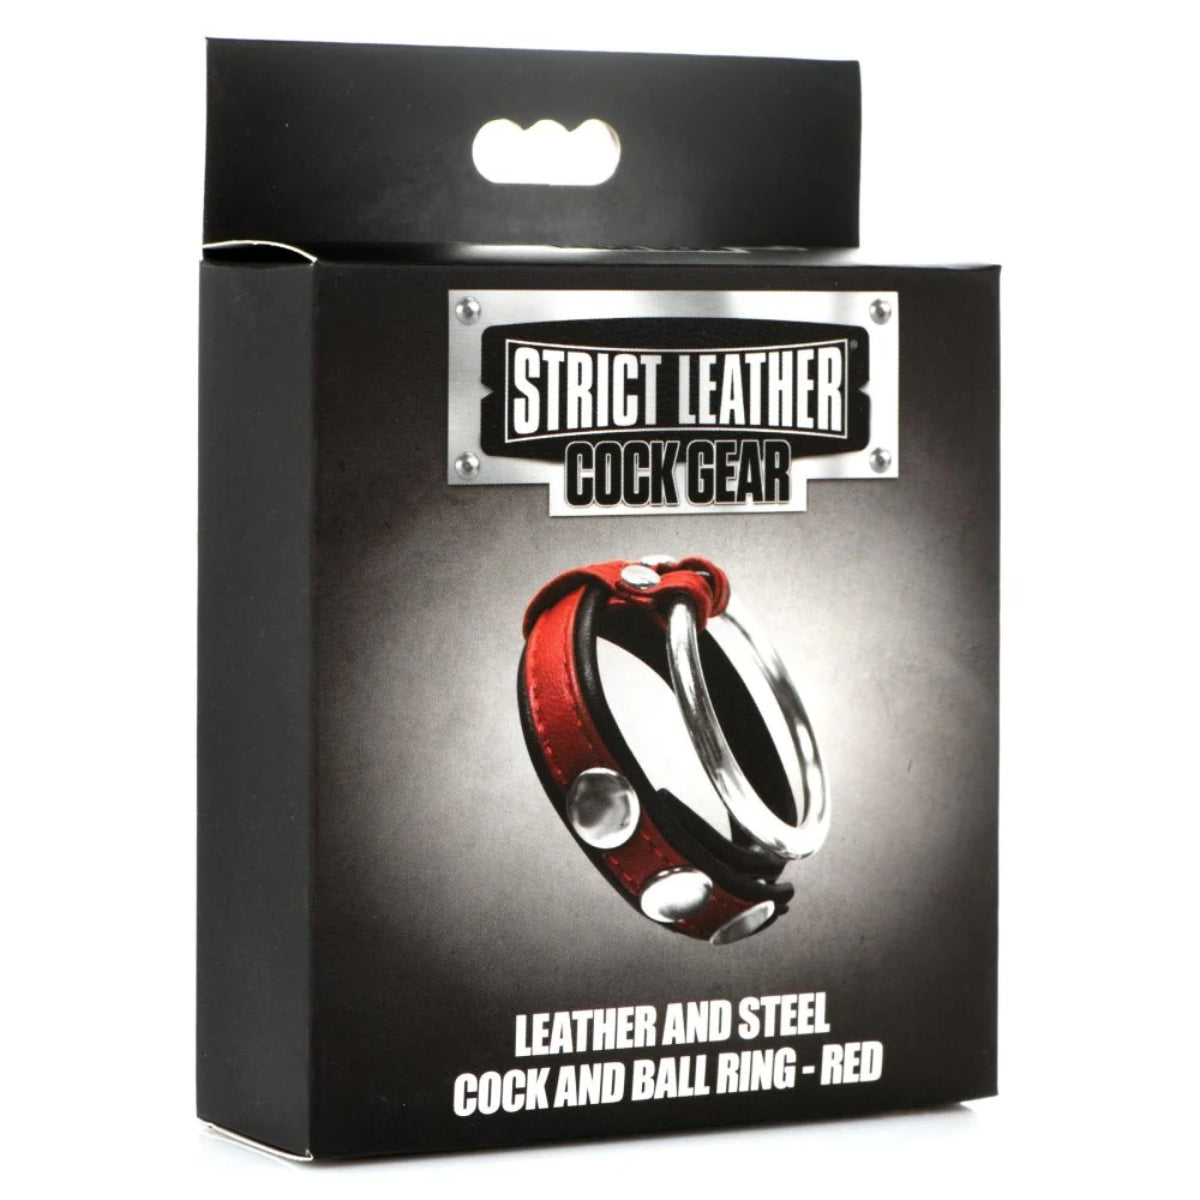 Strict Leather Cock Gear Leather And Steel Cock & Ball Ring Red